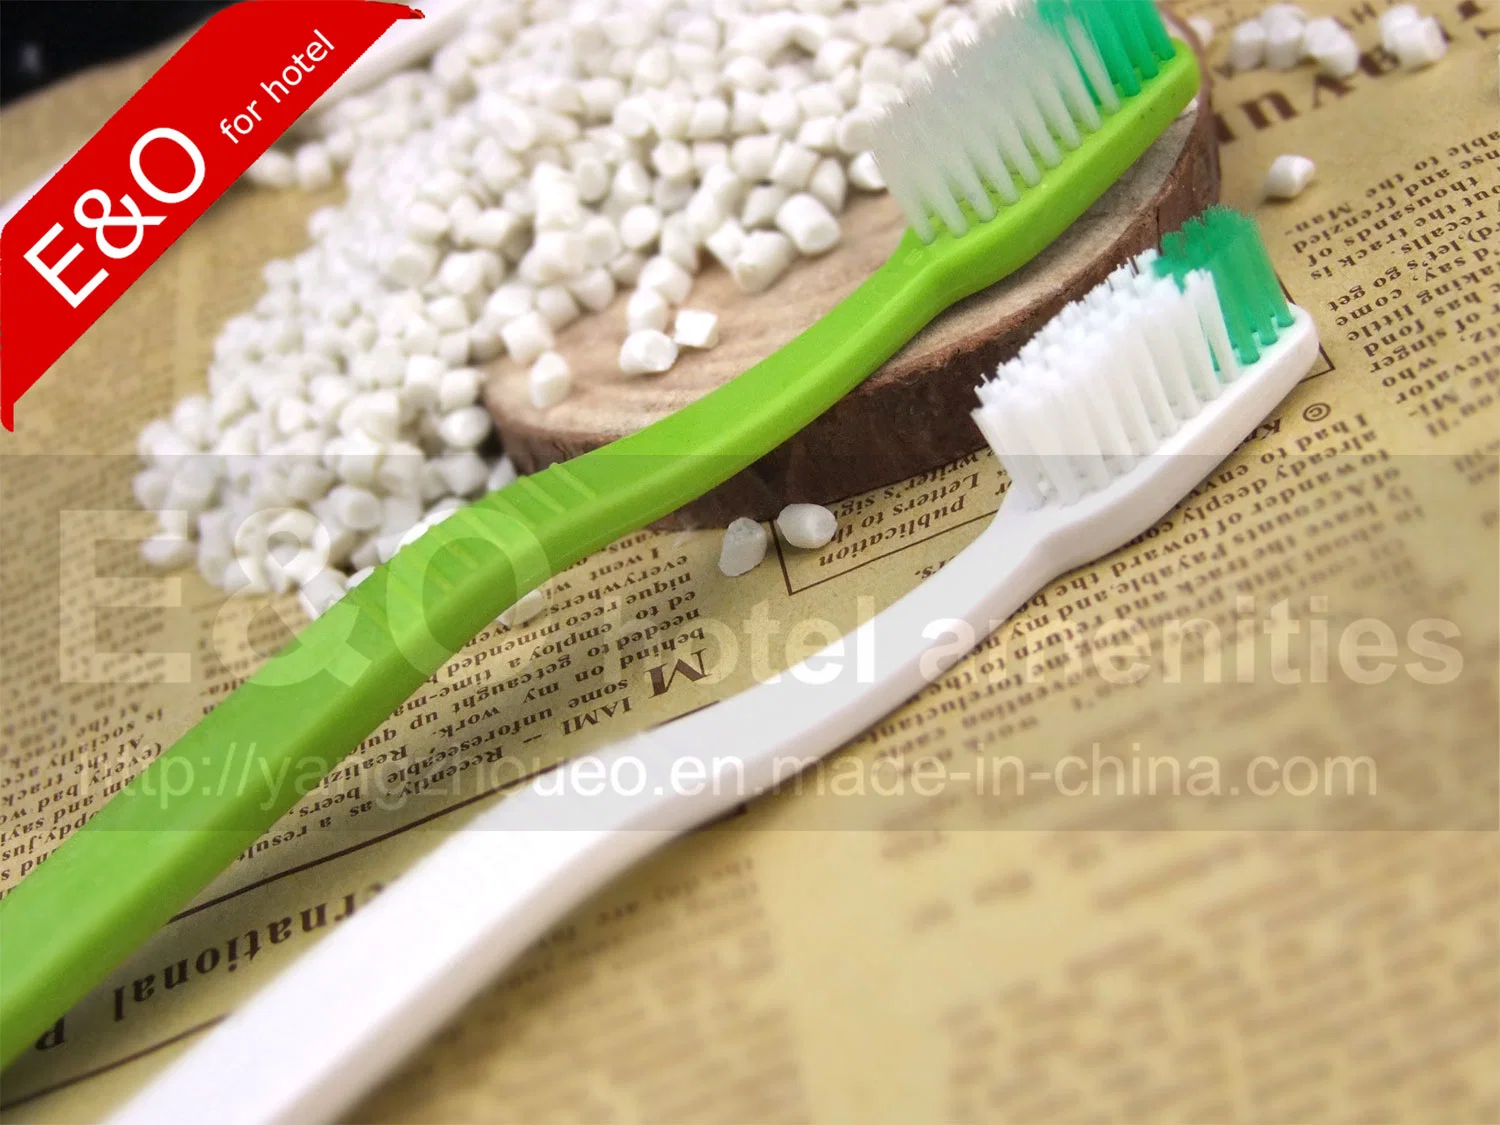 Disposable Degradable Biodegradable Cheap Hotel Toothbrush